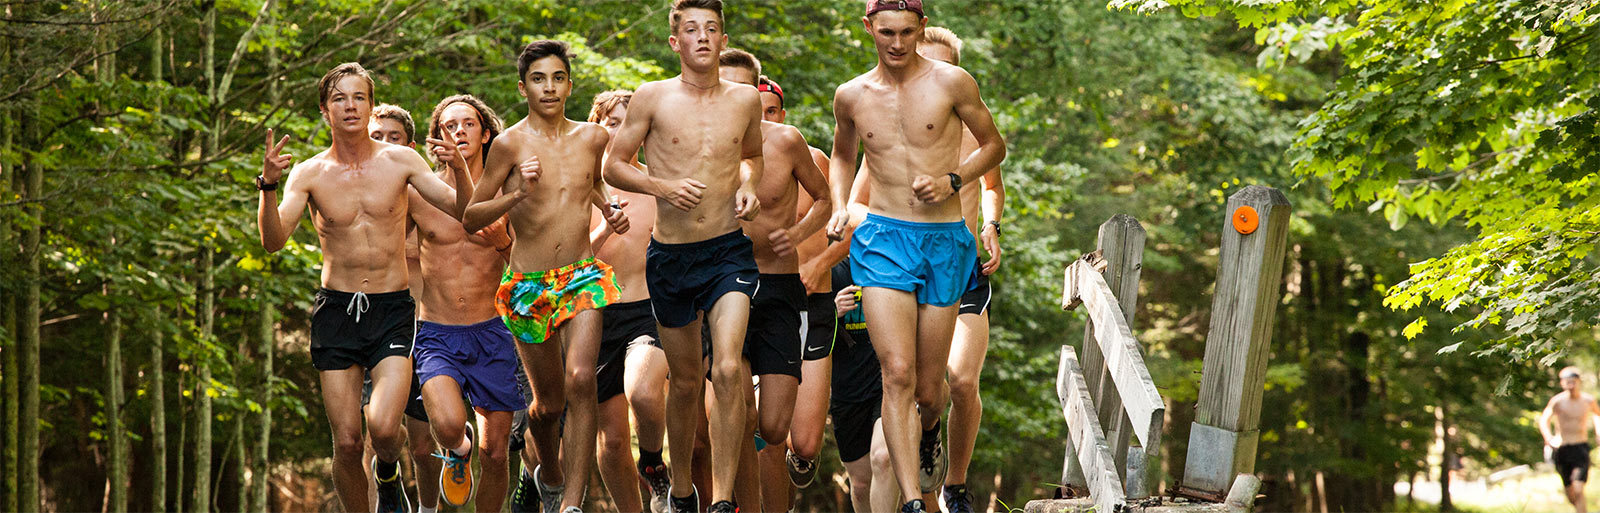 Five-Star Cross Country Running Camp at Iroquois Springs